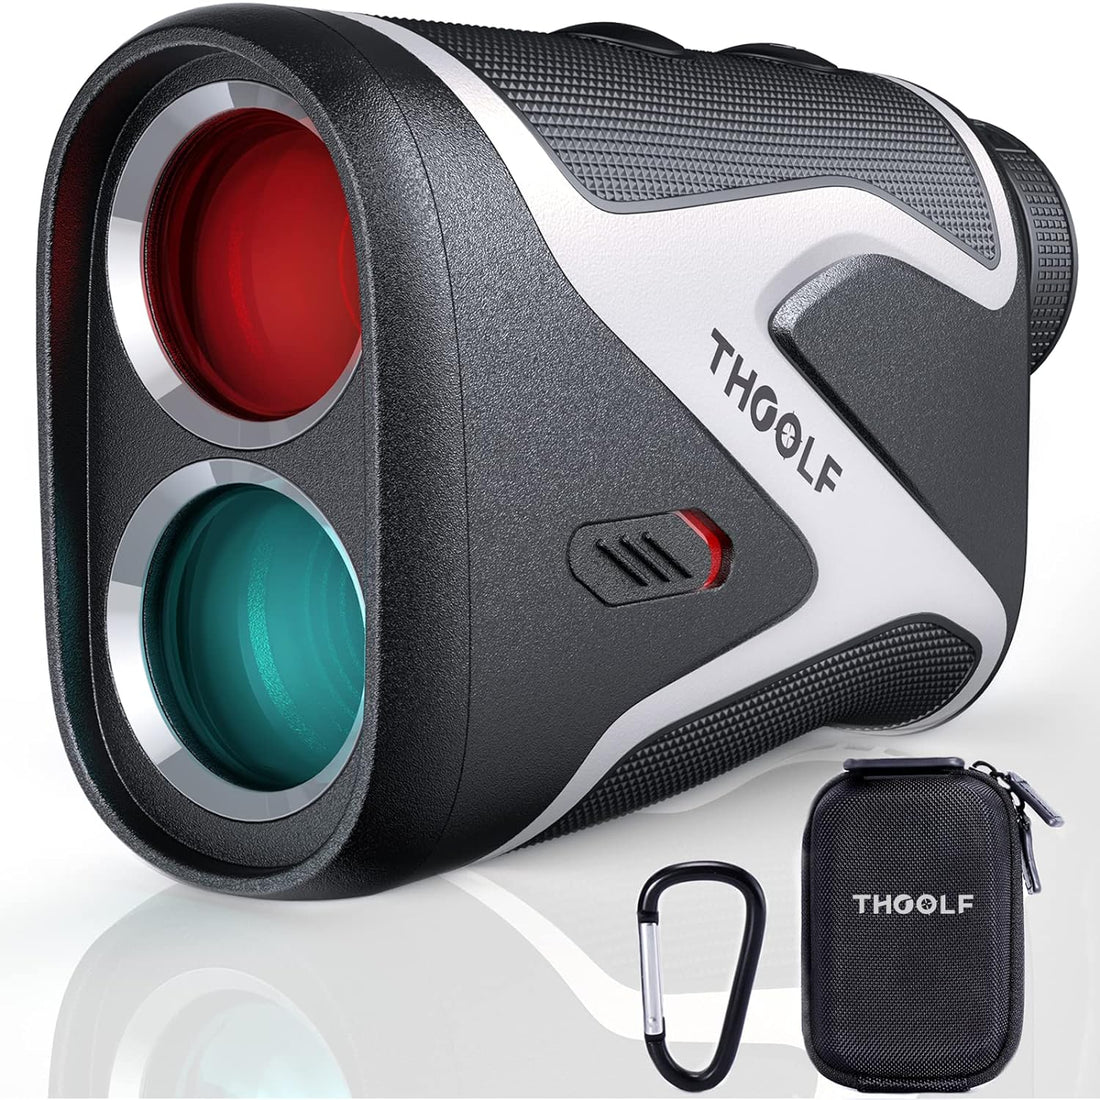 Golf Rangefinder with Slope, USB Rechargeable 1300 Yard Range Finder Whit Magnetic Strip,7X Magnification,25mm Viewfinder,Flag Lock and Pulse Vibration,THGOLF Golf Accessories for Golfing and Hunting